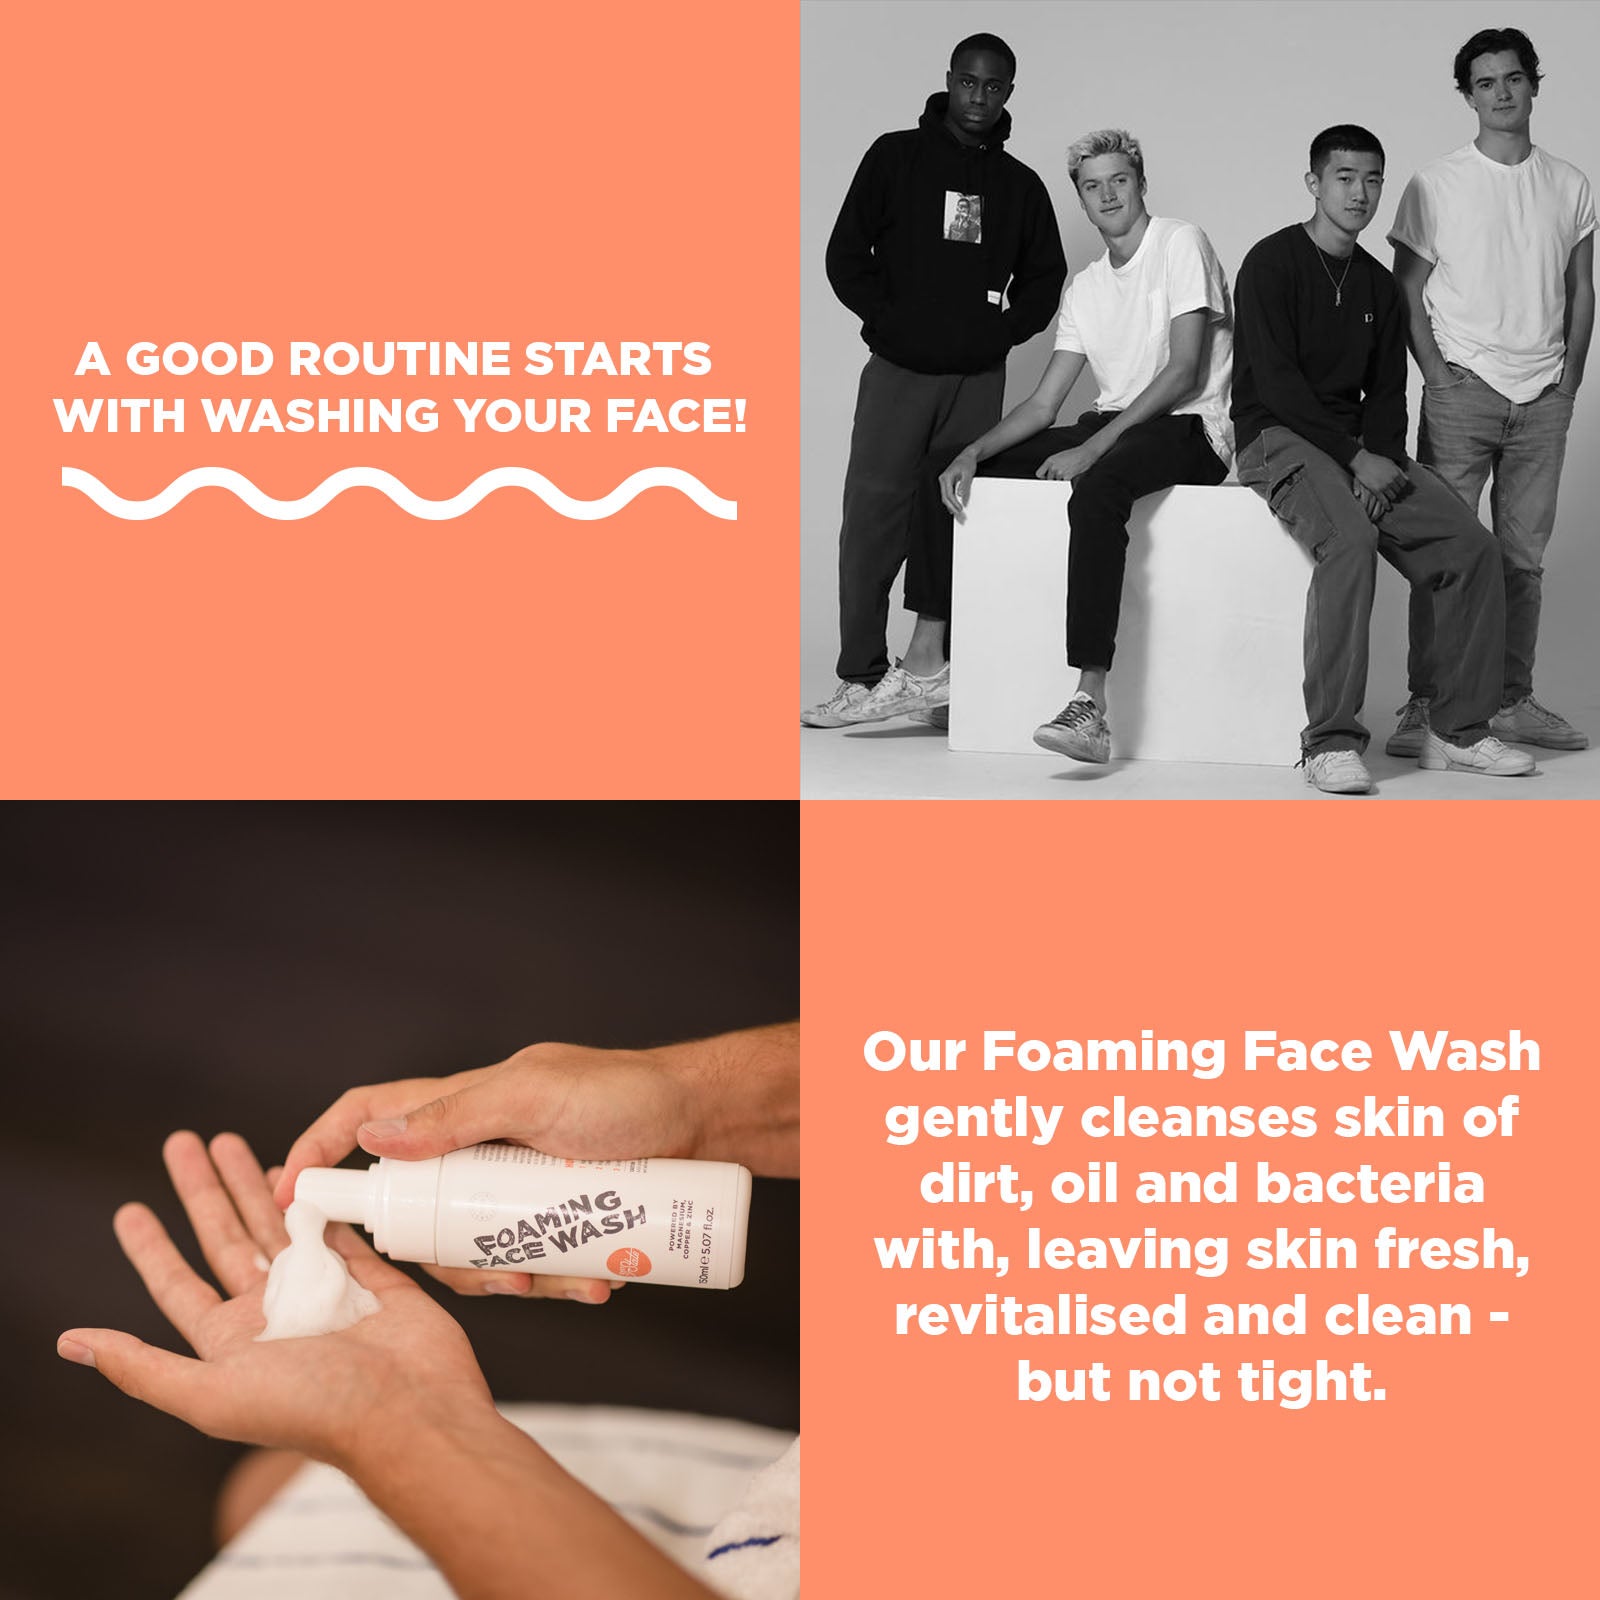 A good routine starts with washing your face! Our Foaming Face Wash gently cleanses skin of dirt, oil and bacteria with, leaving skin fresh, revitalised and clean - but not tight.